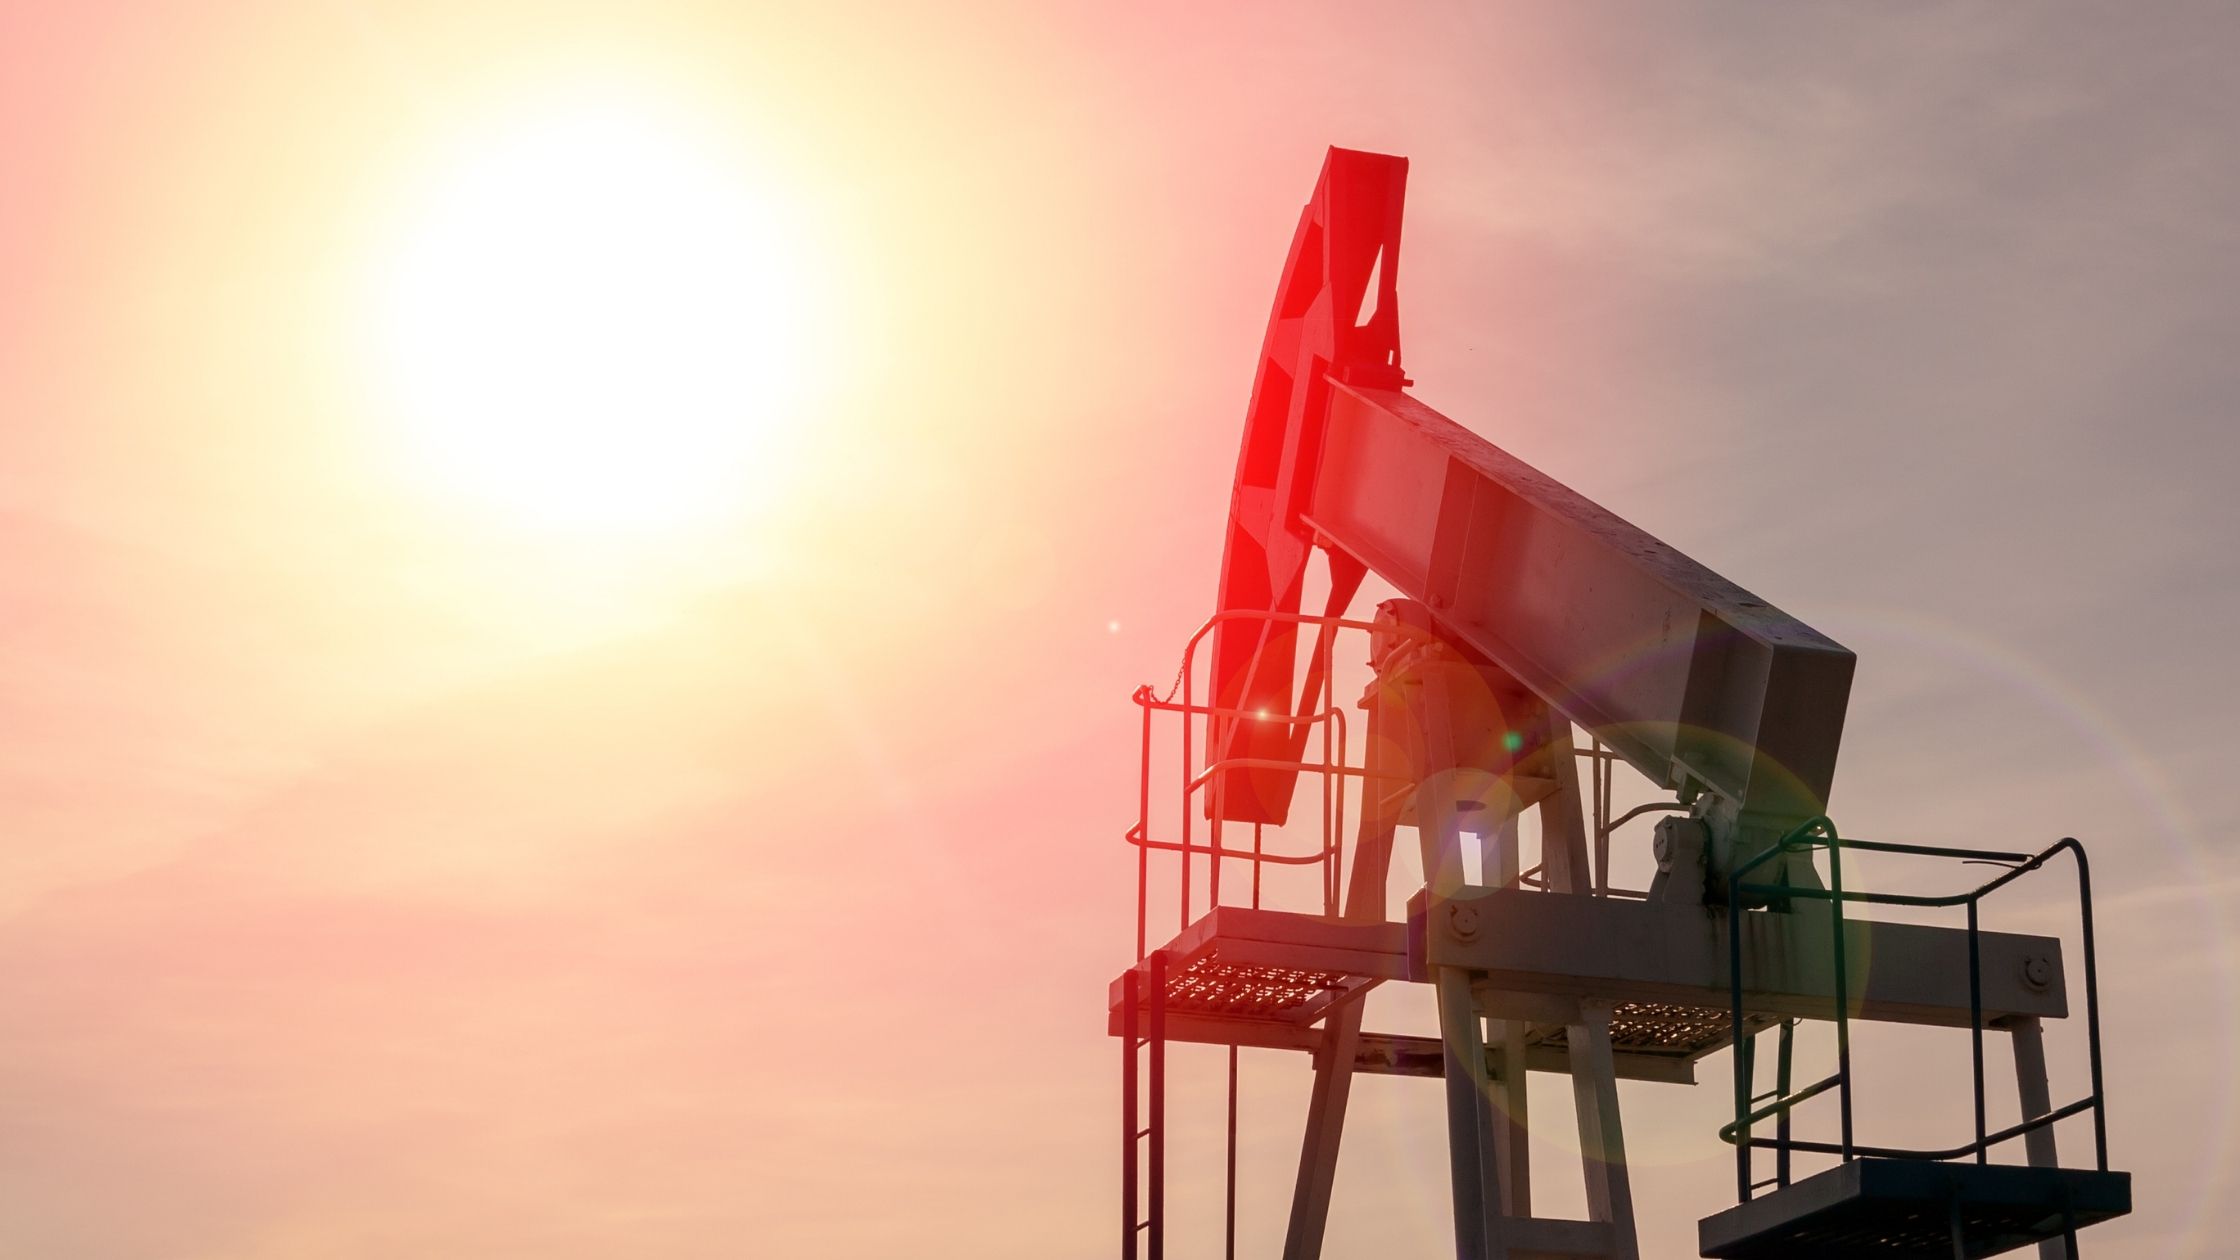 How To Invest In Oil and Gas: 13 Tips from Experts